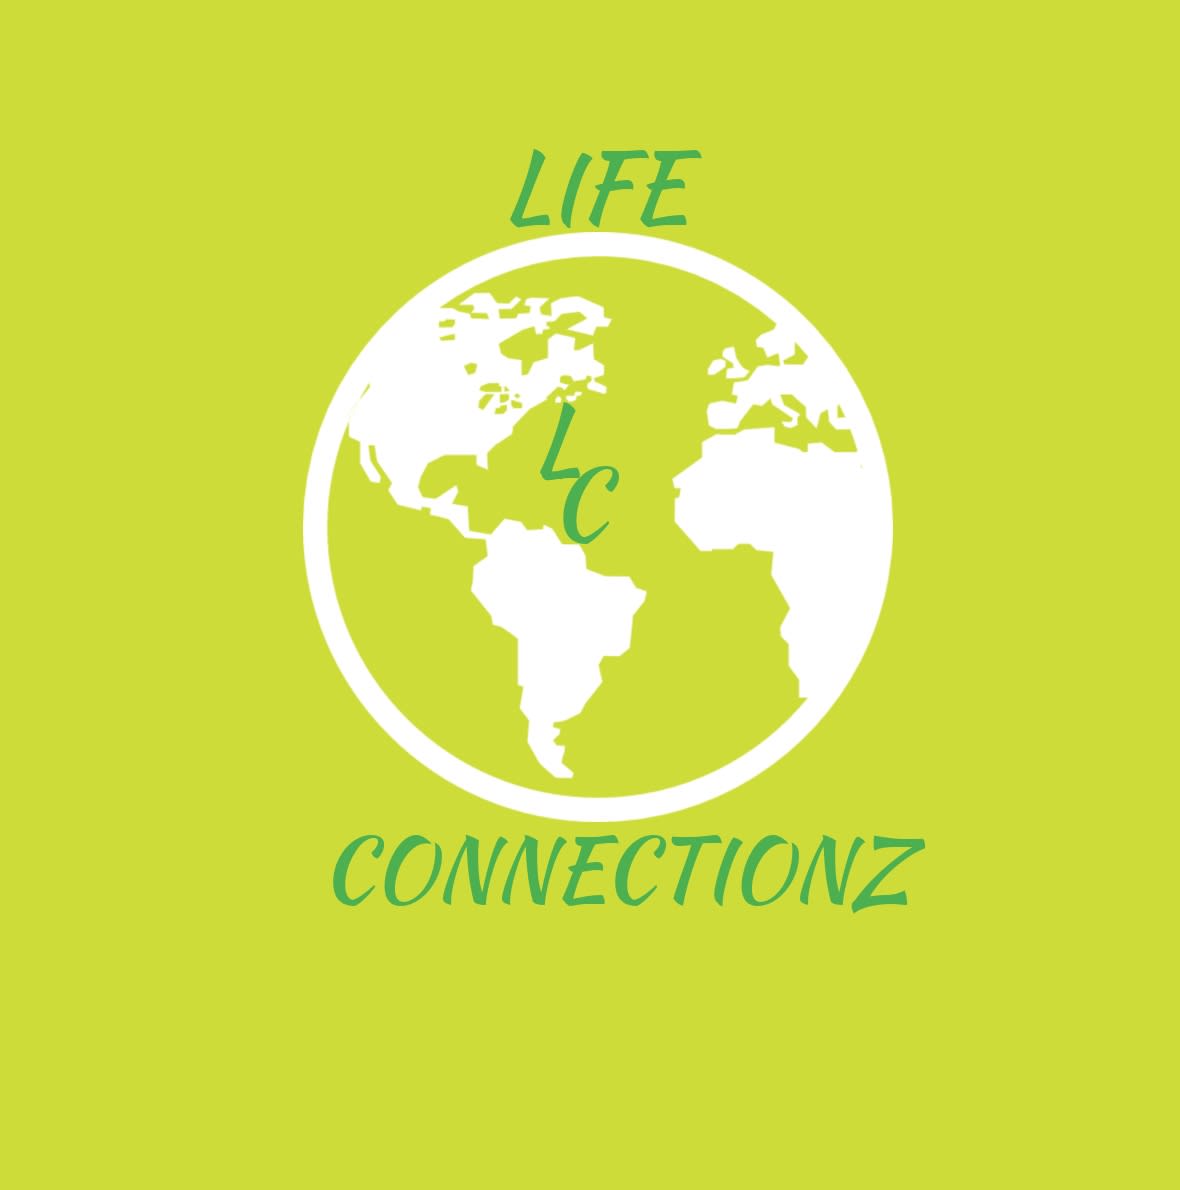 Life Connectionz